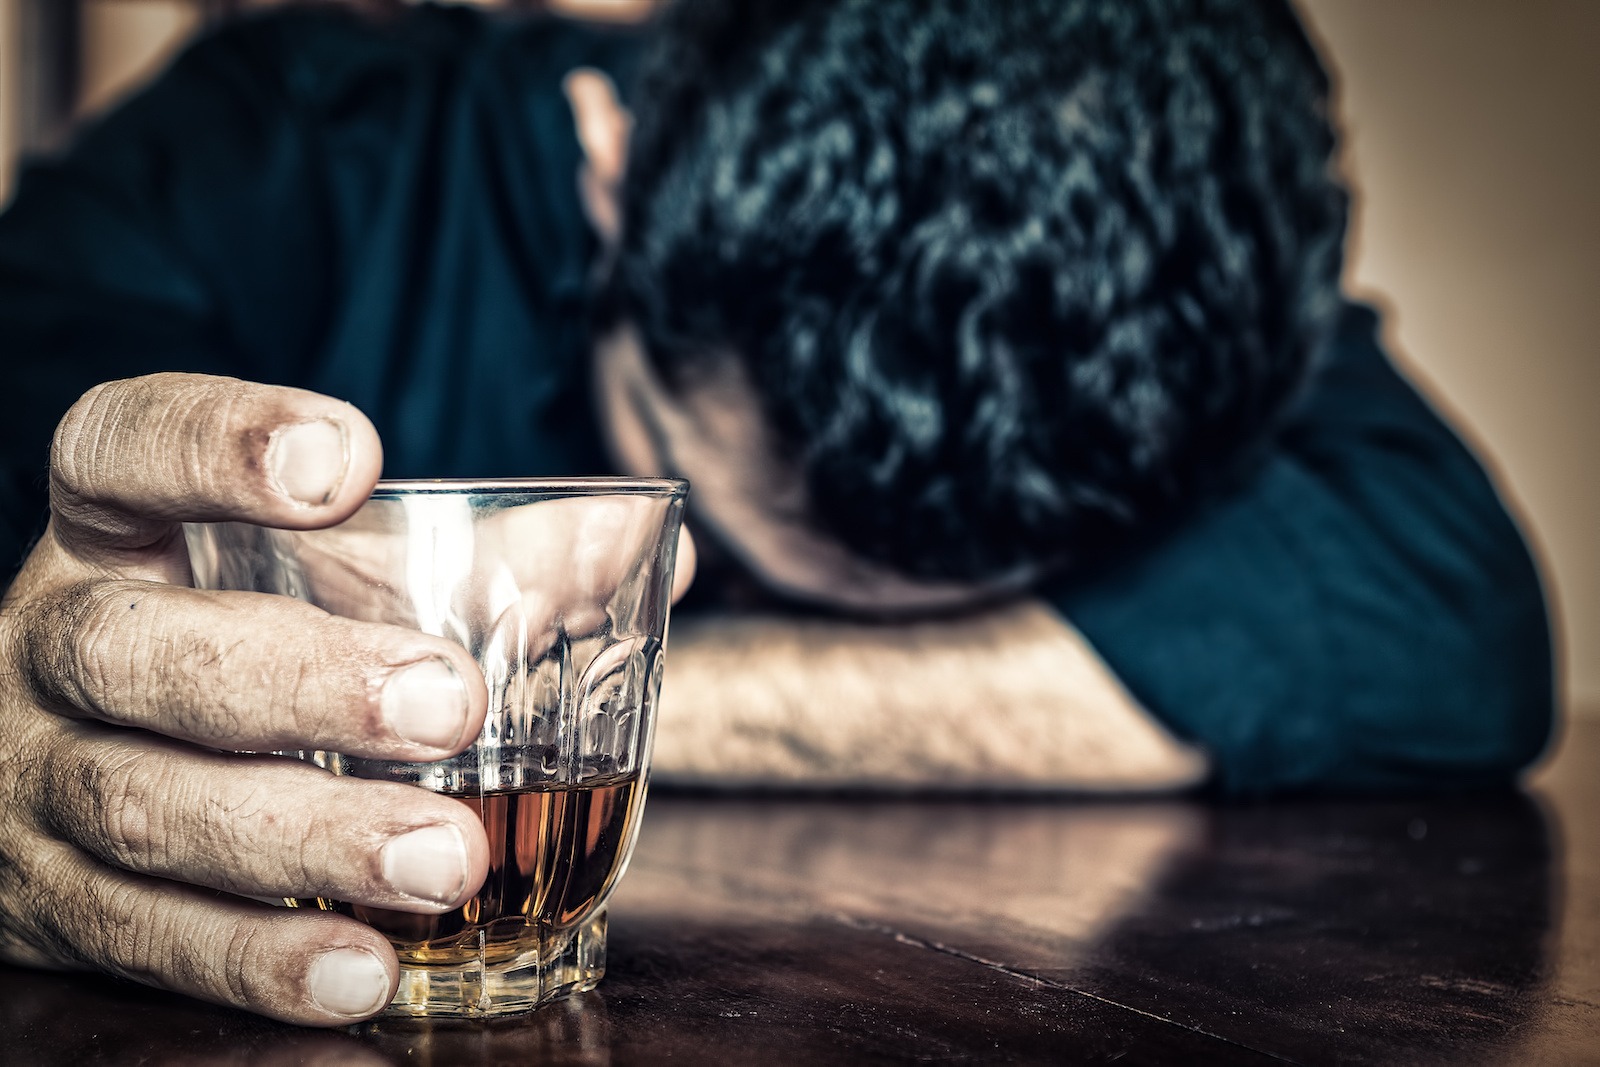 How An Alcoholic’s Nose May Be Pointing To An Addiction